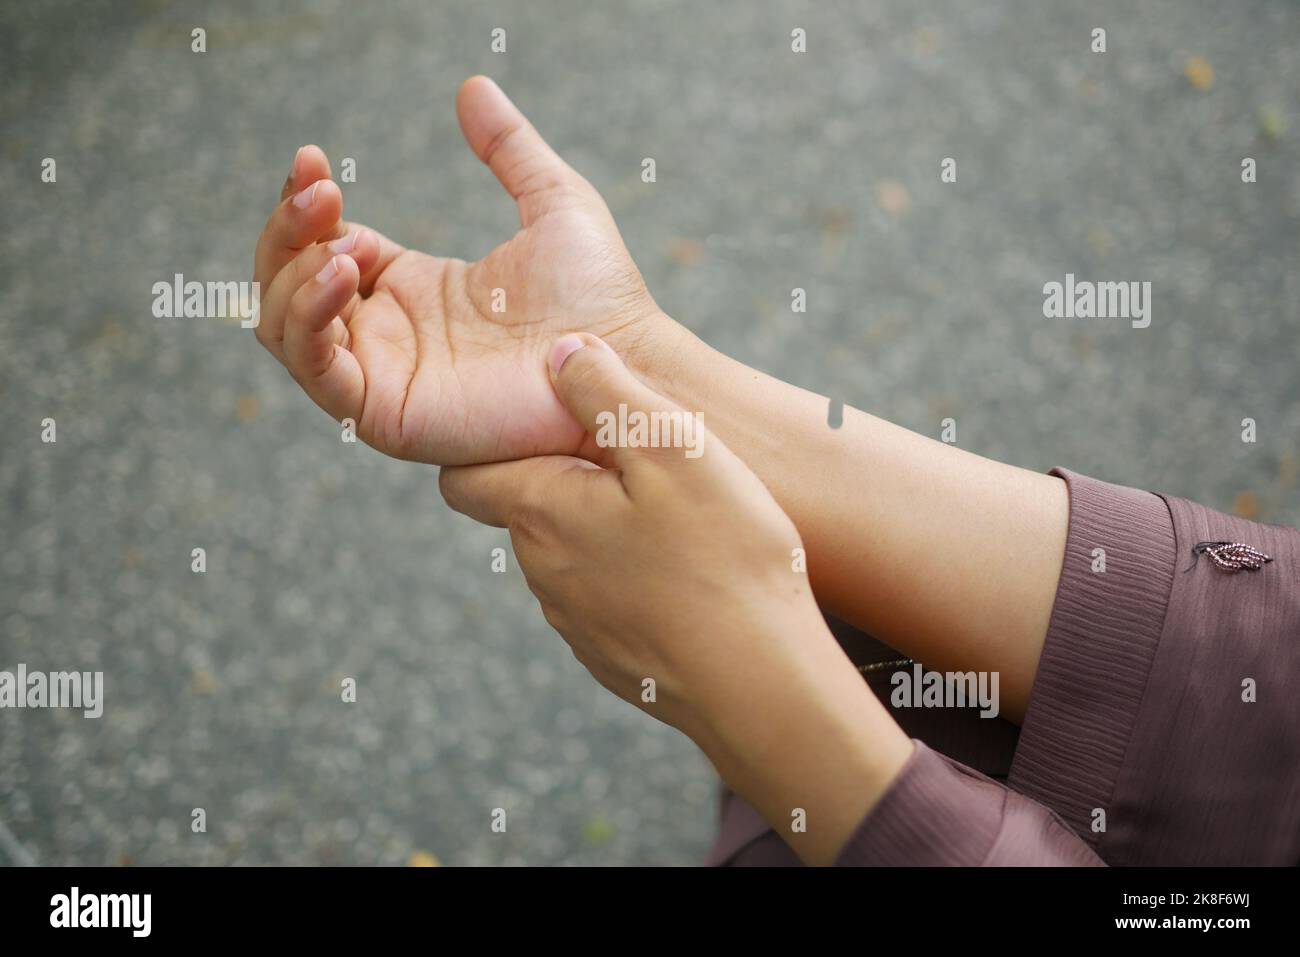 rear view of women suffering pain in hand  Stock Photo